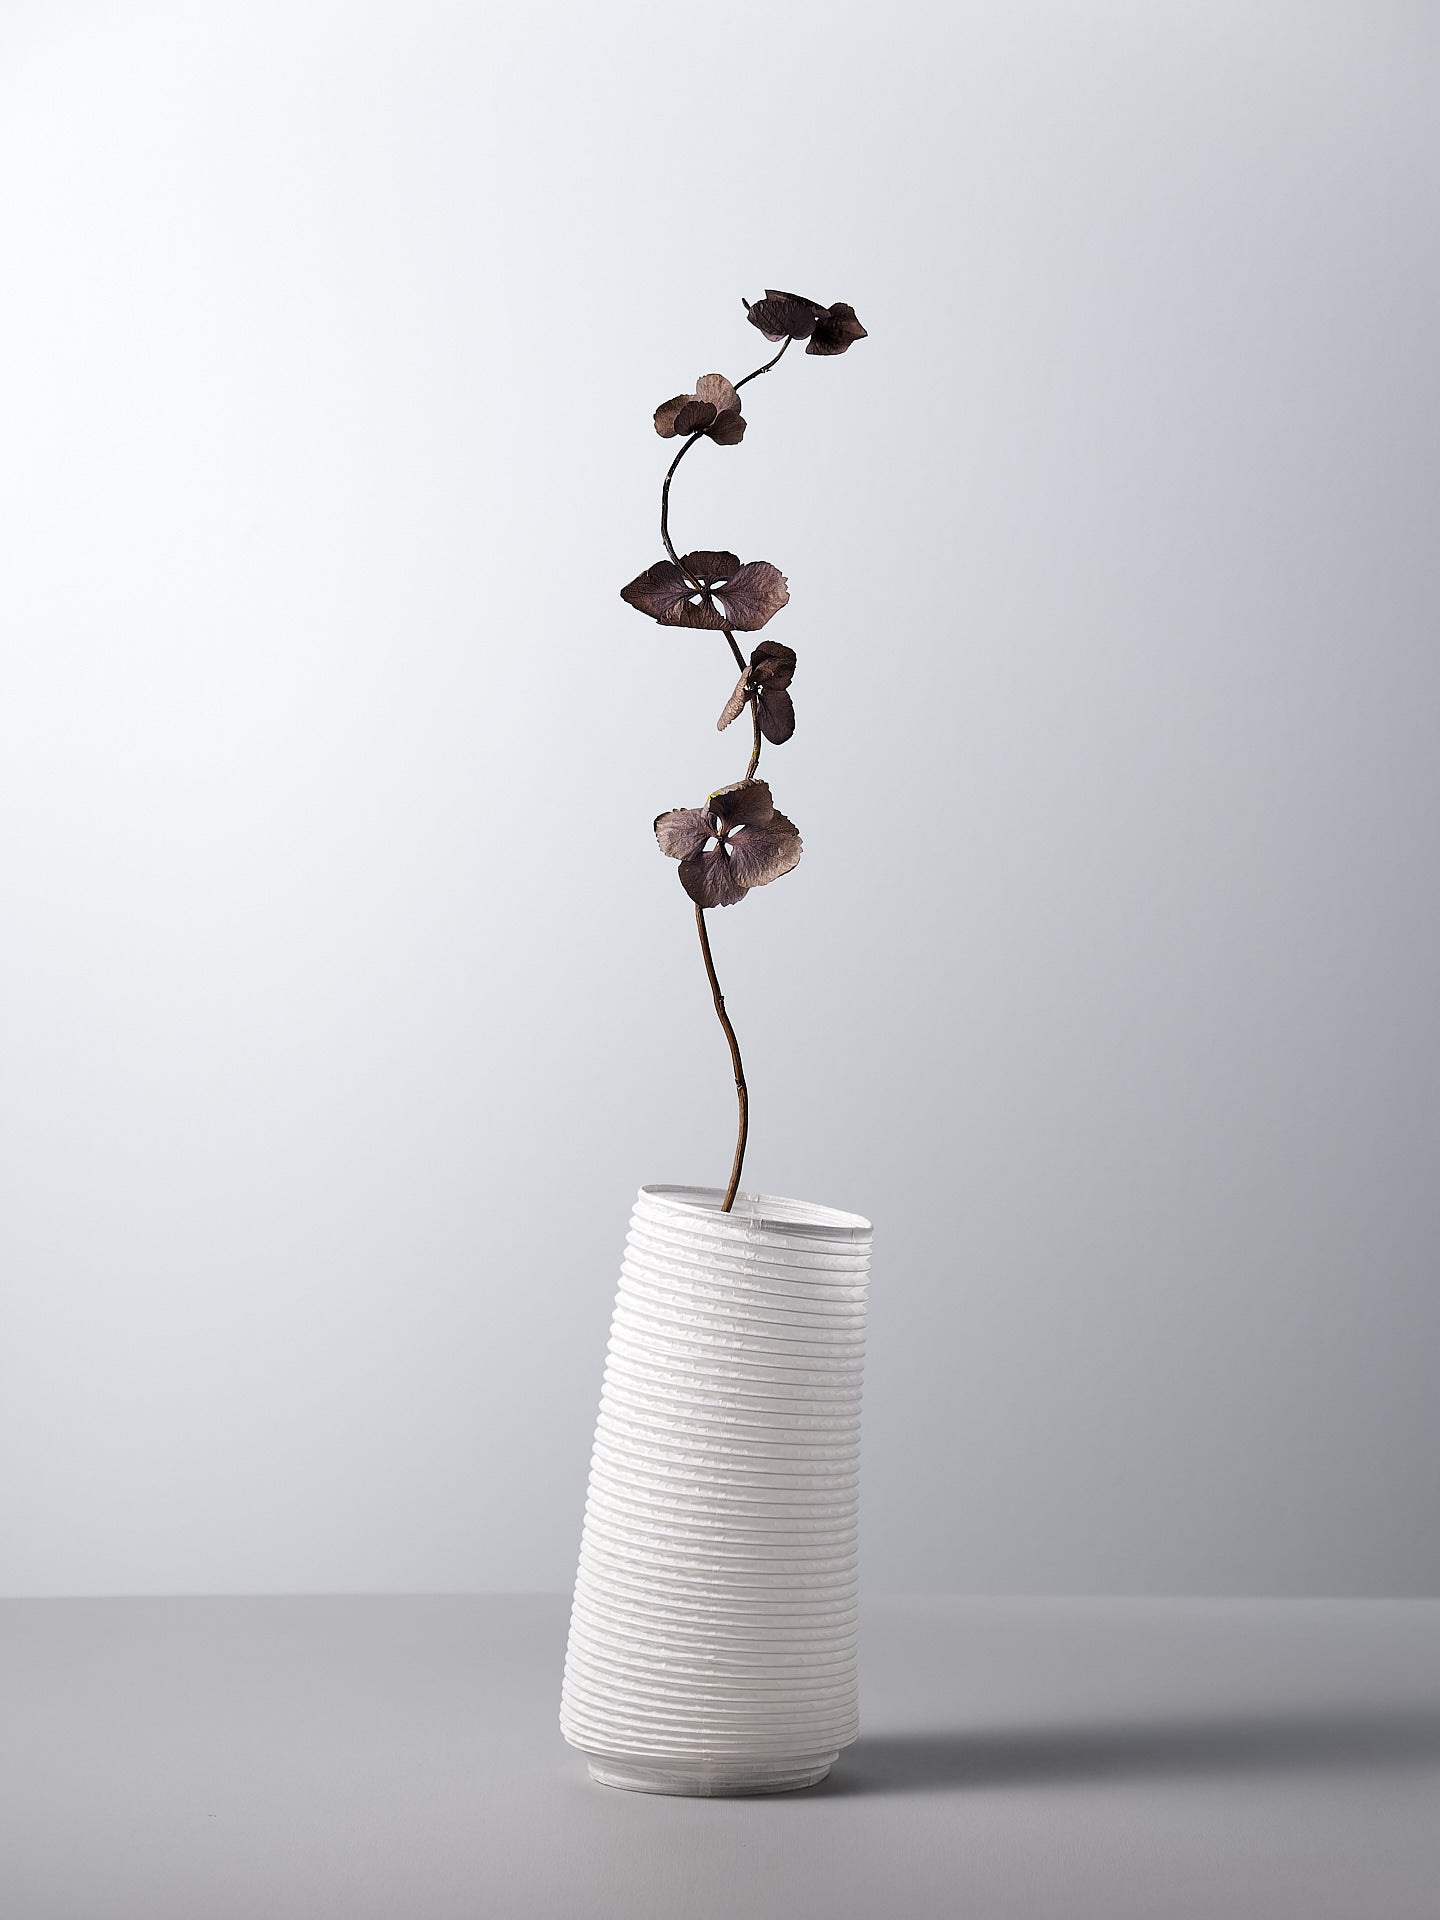 A Nobi-tsutsu Paper Vase - №3 by Hayashi Kougei with a flower in it.